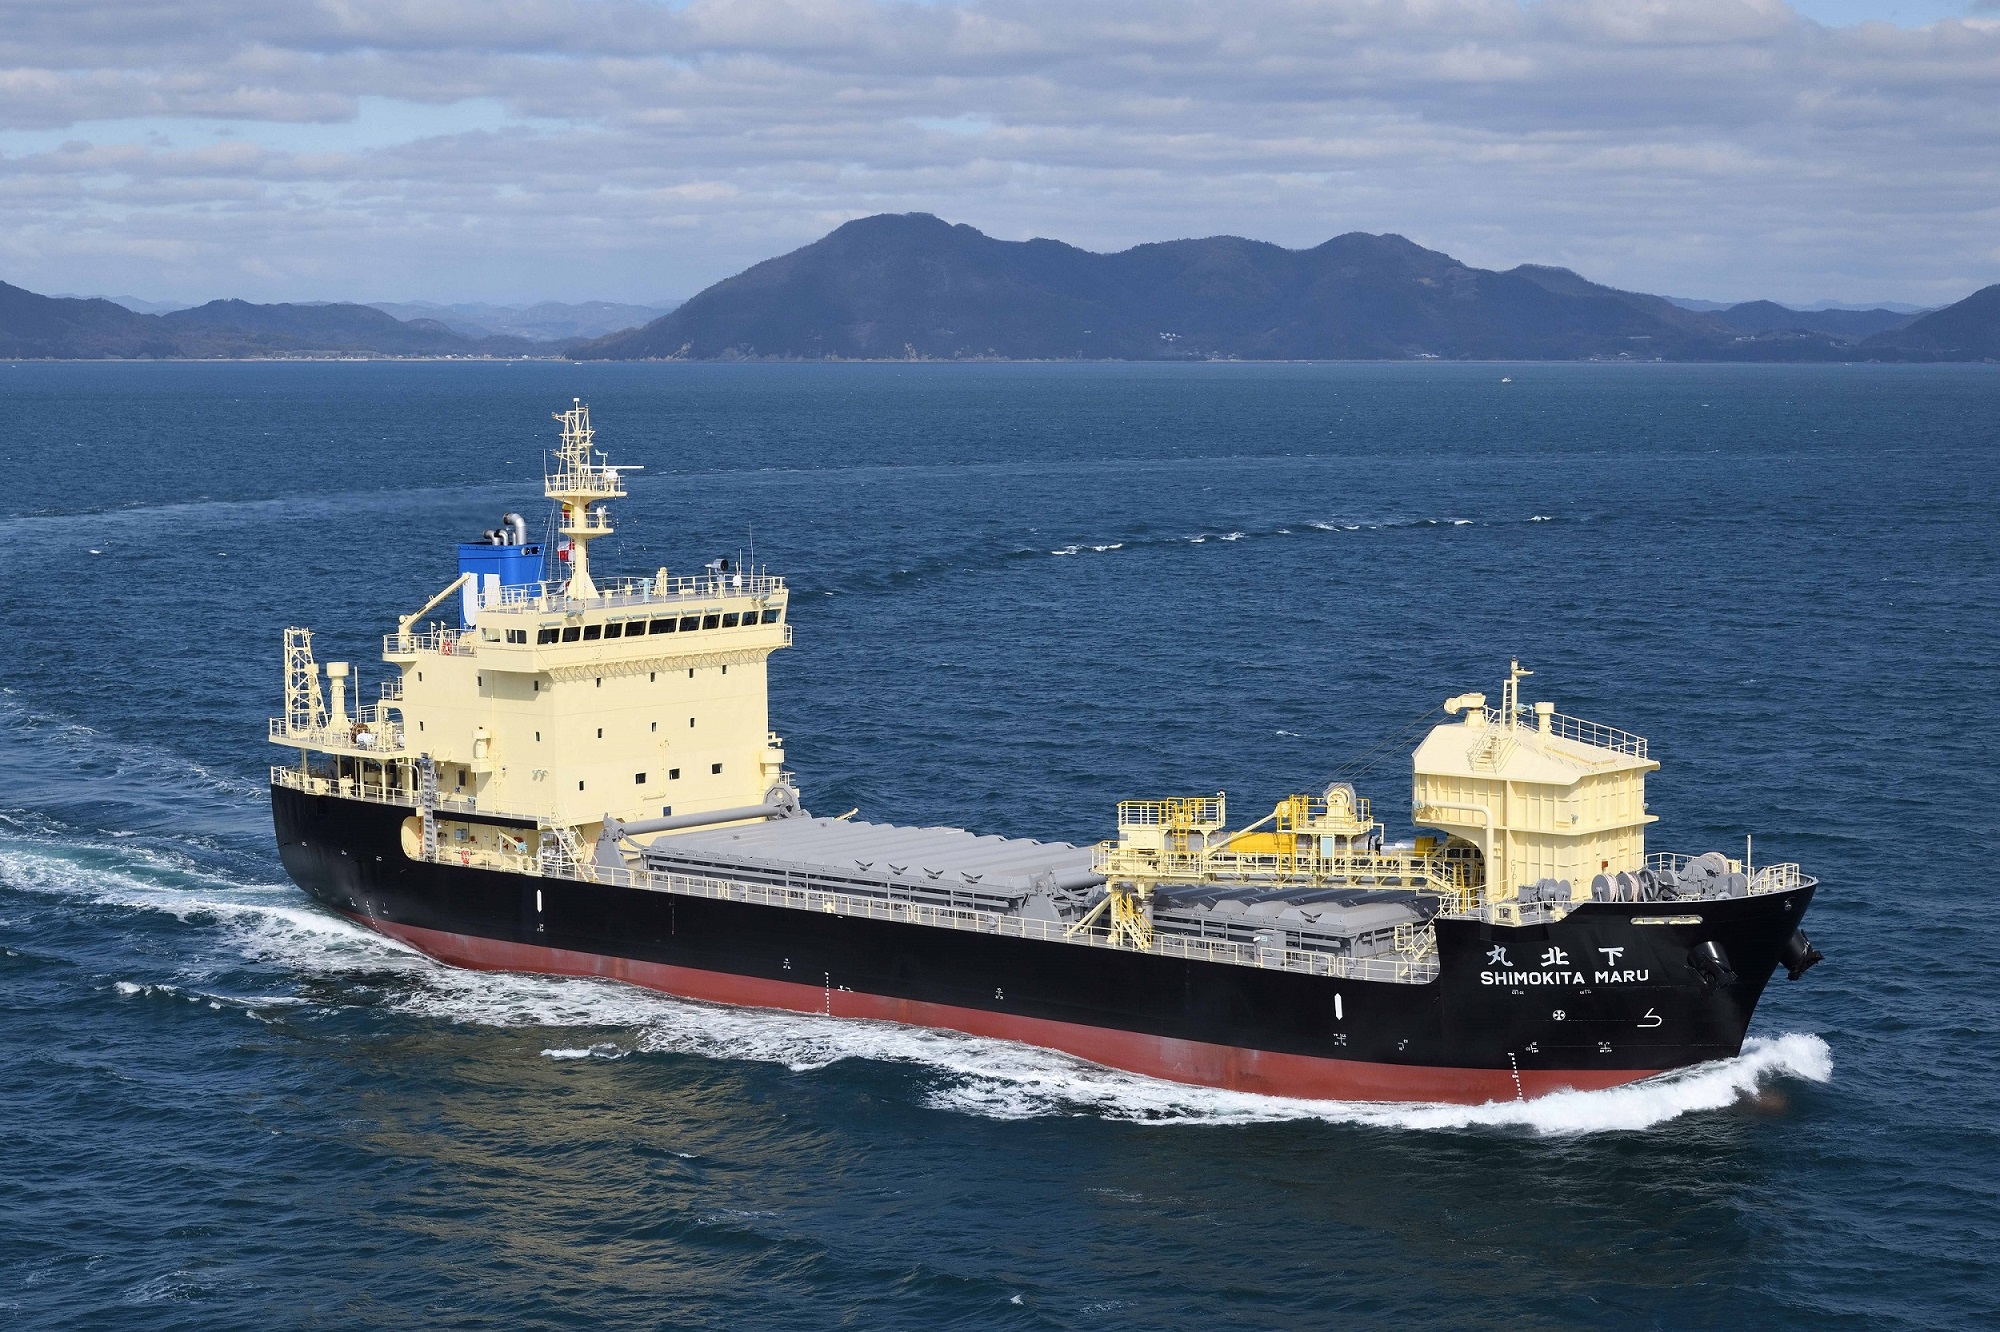 TSUNEISHI SHIPBUILDING Has Completed the Delivery of LNG-Specific Limestone Carrier as Our First Alternative Fuel Ship